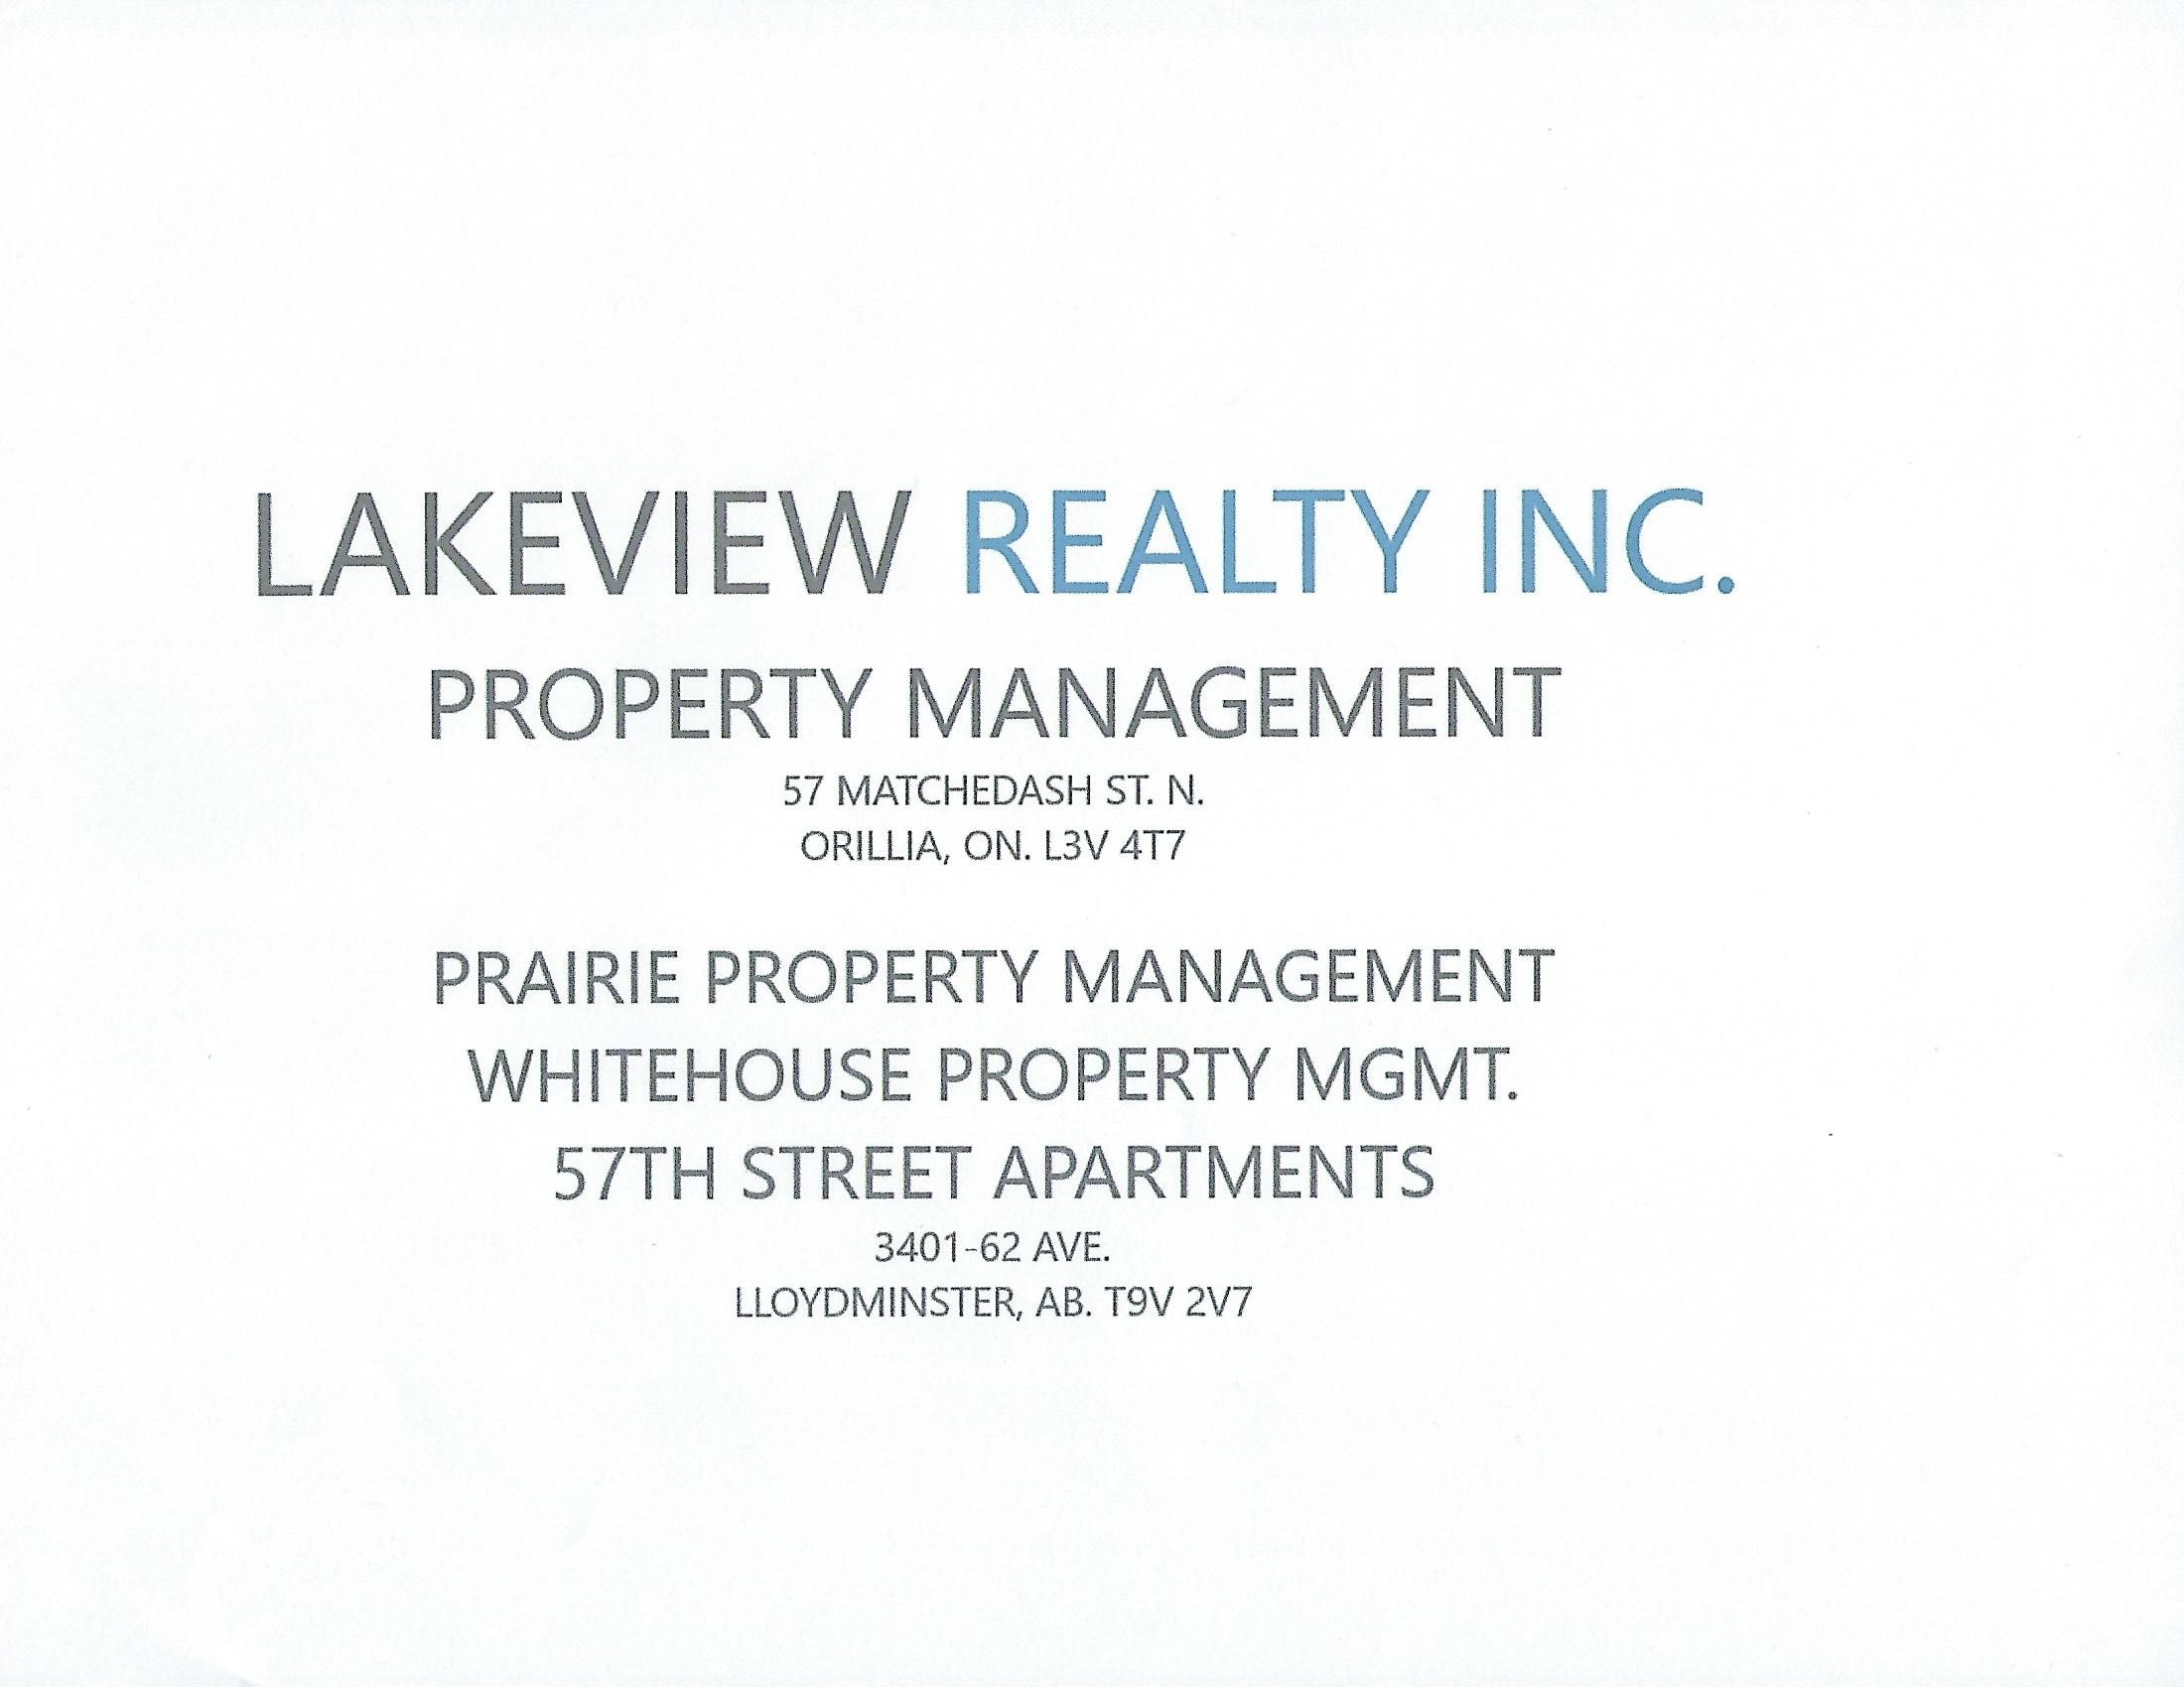 LAKEVIEW REALTY INC.